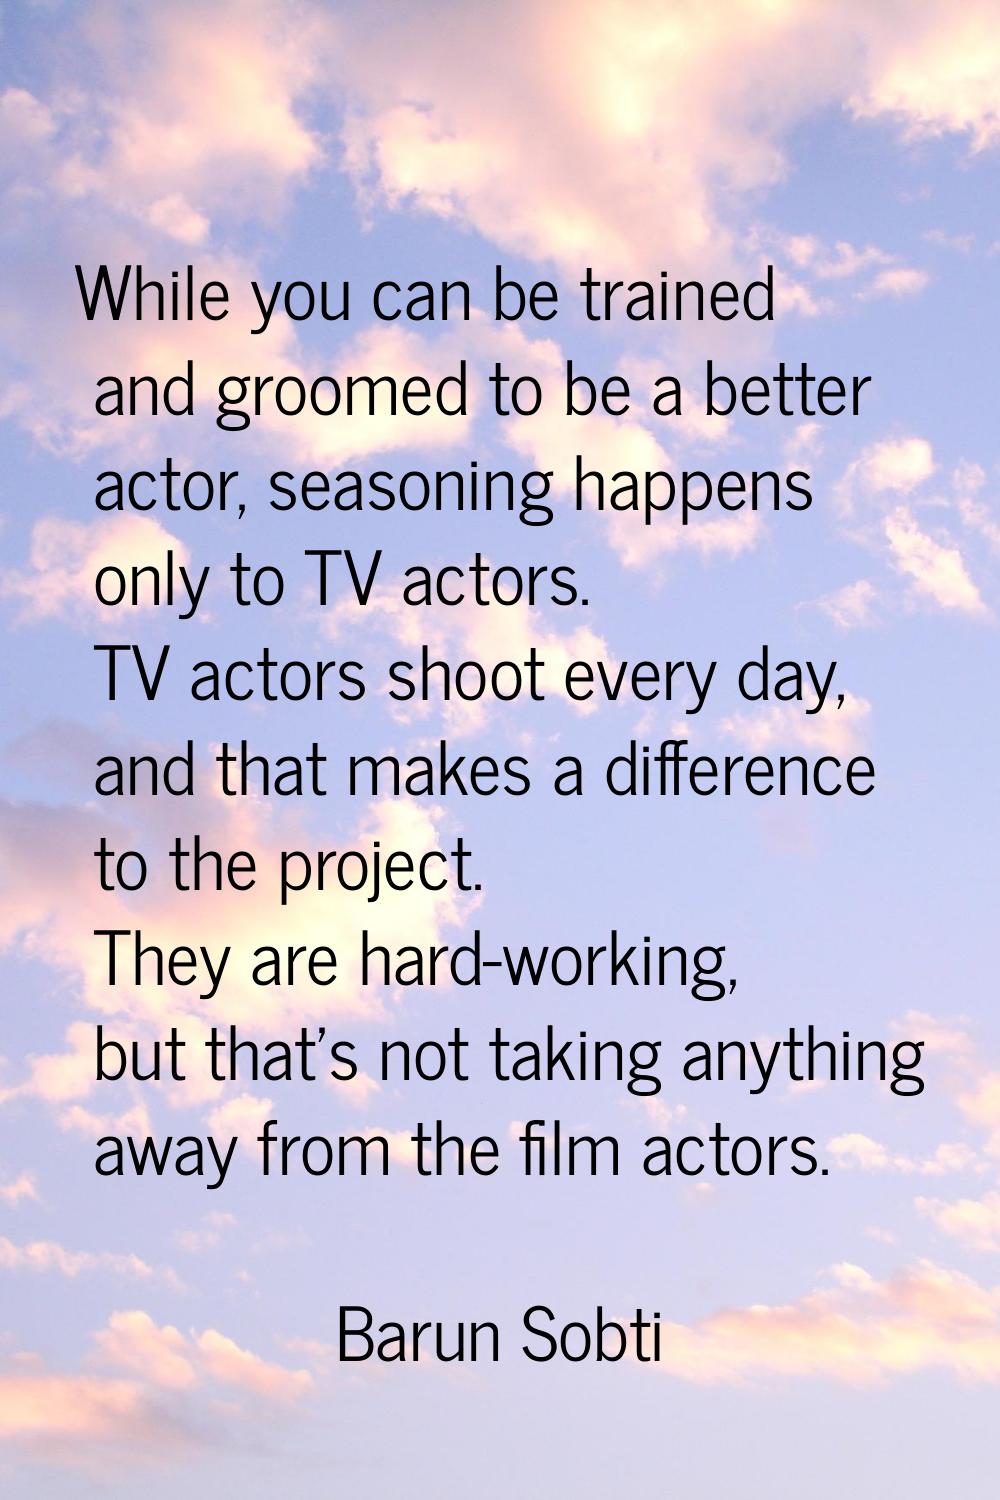 While you can be trained and groomed to be a better actor, seasoning happens only to TV actors. TV 